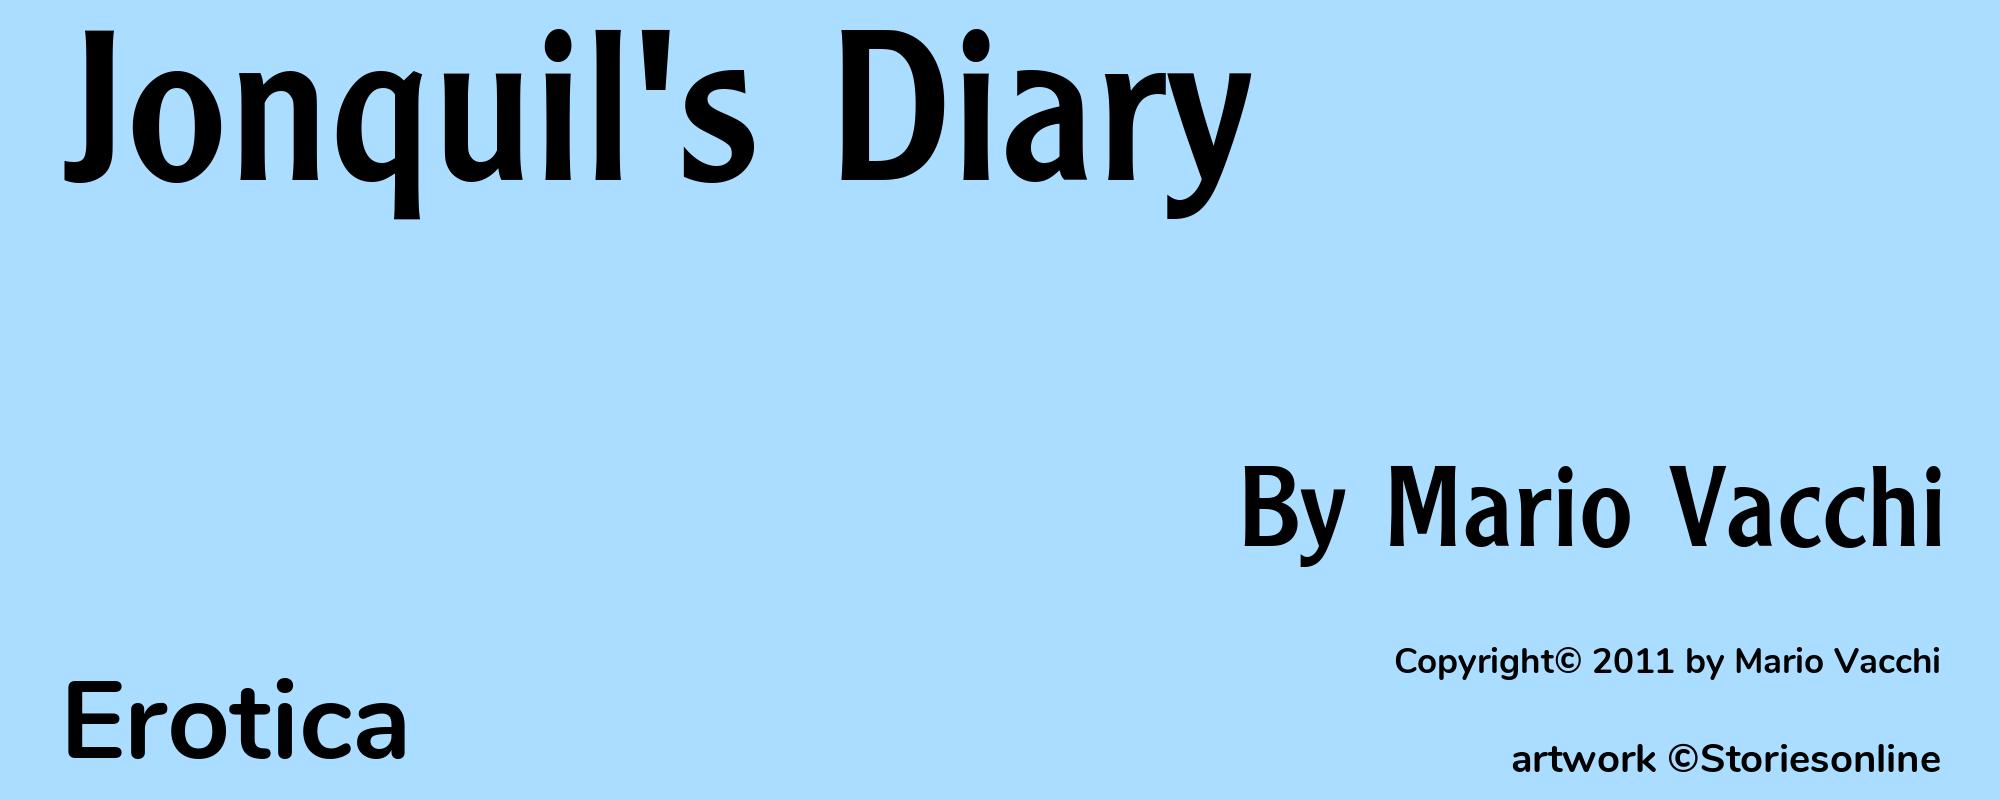 Jonquil's Diary - Cover